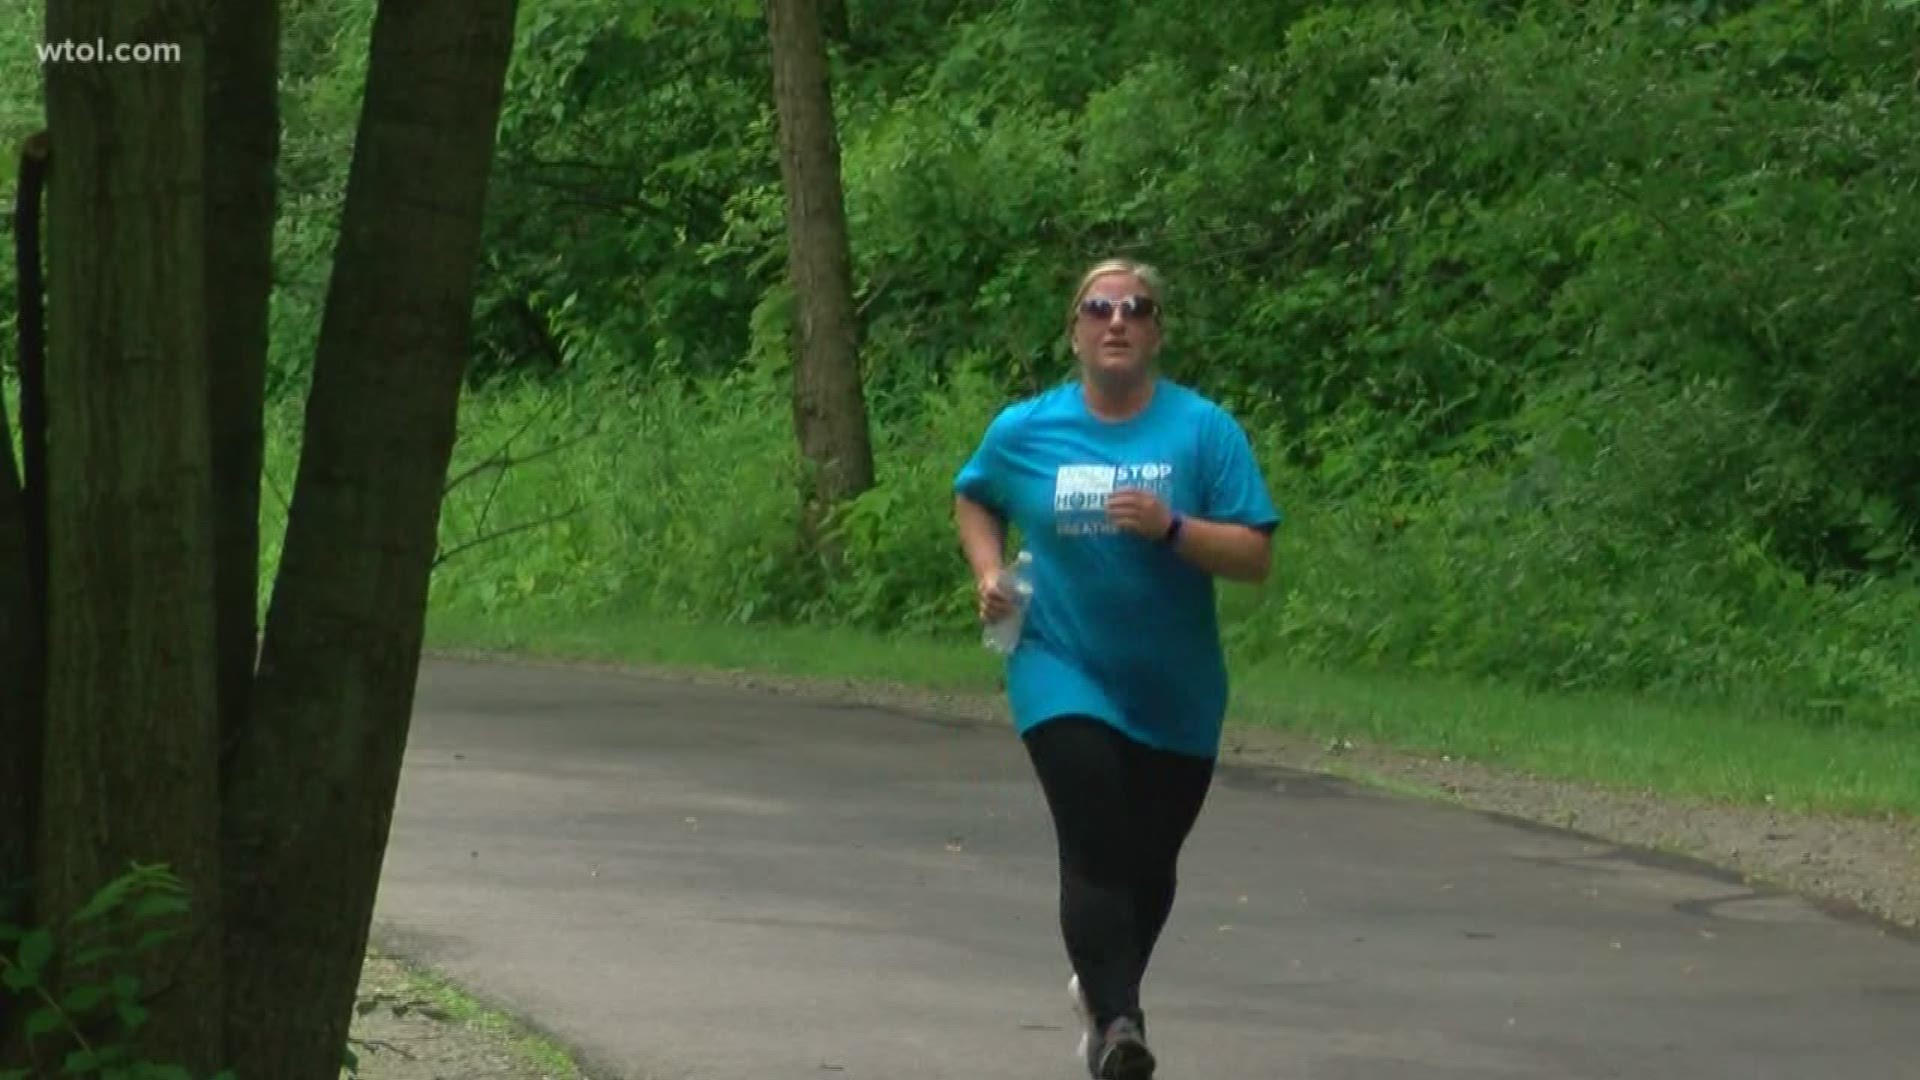 The annual 5K Walk and Fun Run stepped off on Sunday morning.